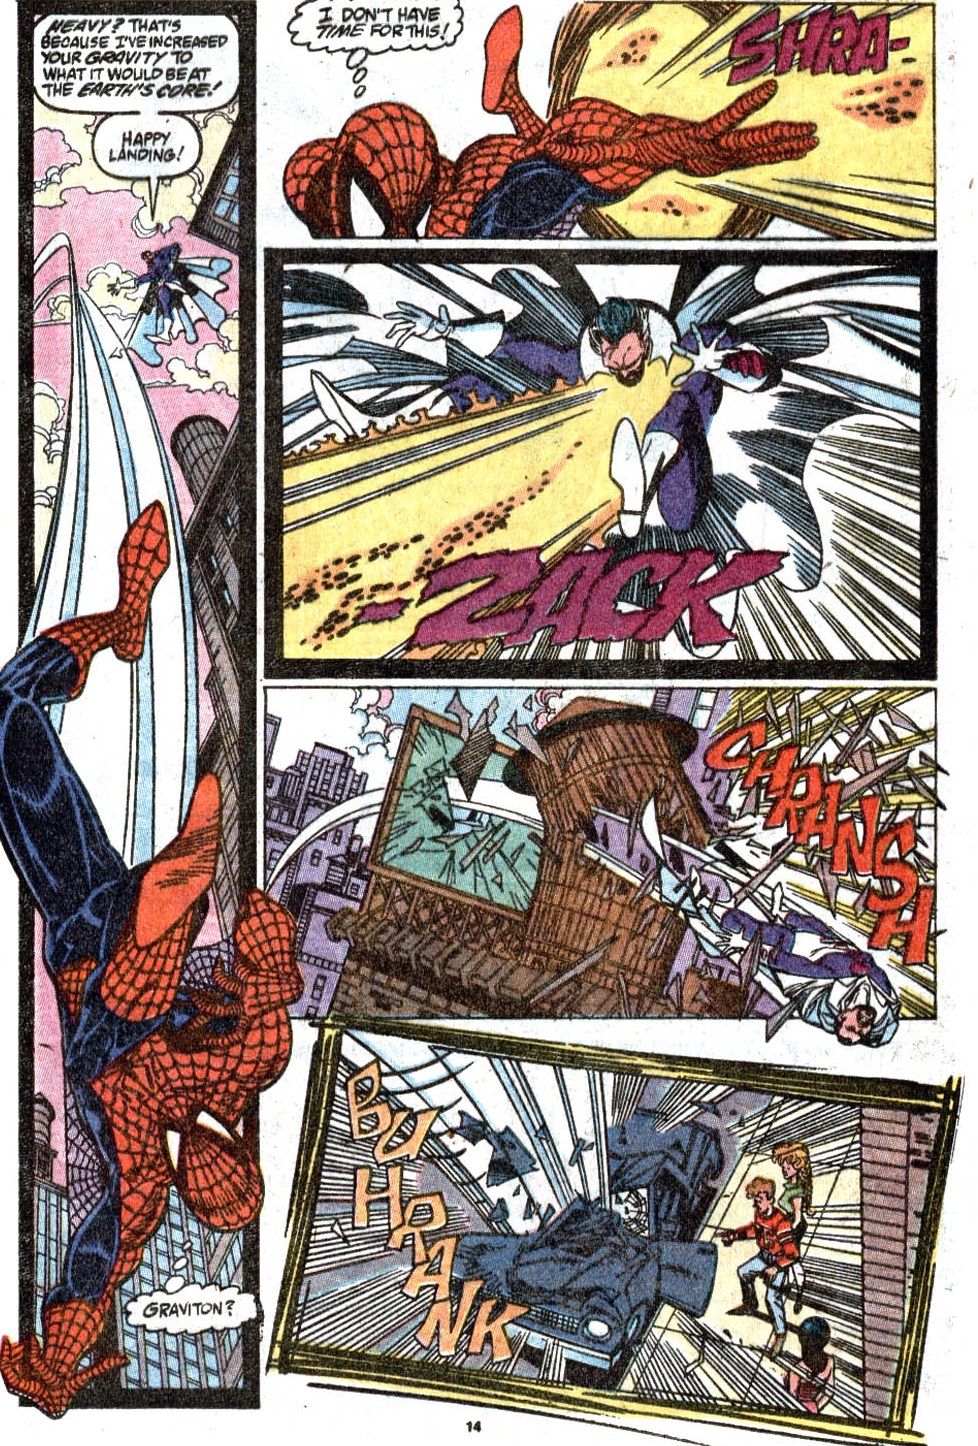 The Wrong Side: Spider-Man vs. Graviton